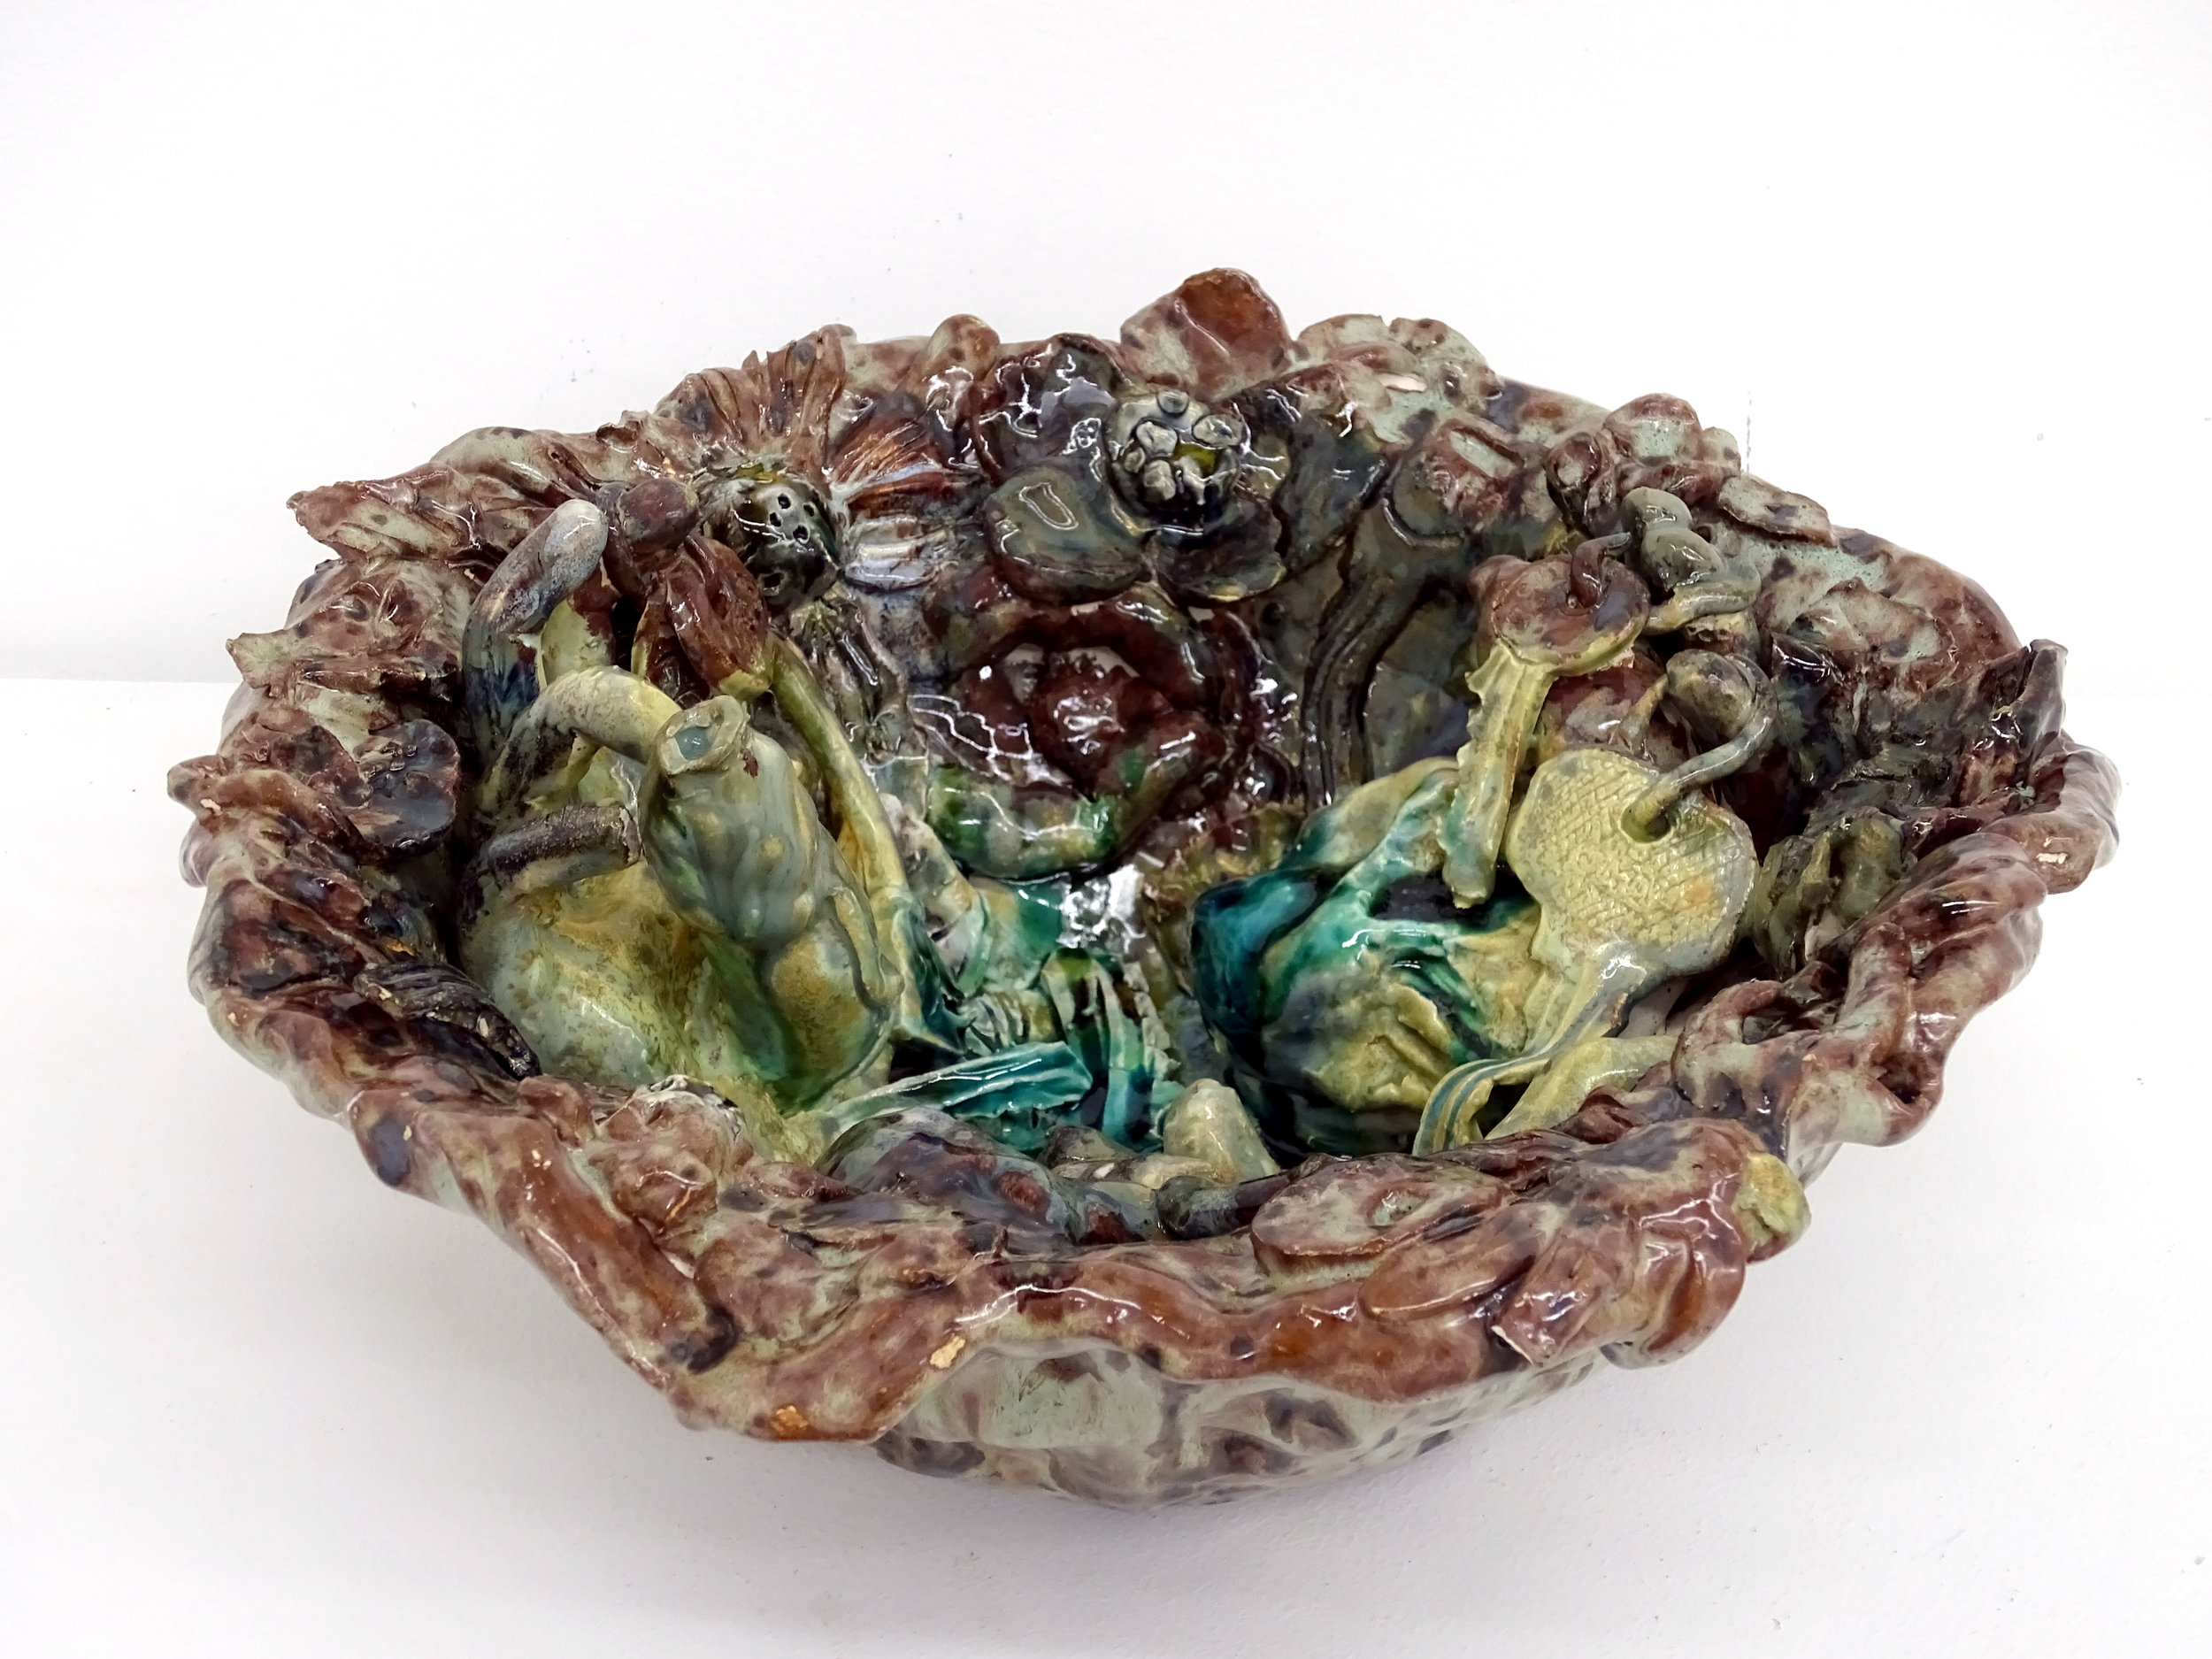 (22) Of All the Things I’ve Lost Proudick (Lindsey Mendick & Paloma Proudfoot) Hannah Barry Gallery at Ballon Rouge Club, Brussels  Lindsey Mendick Your Looks Better Than Mine, 2019 Glazed ceramic   courtesy Hannah Ba.jpg